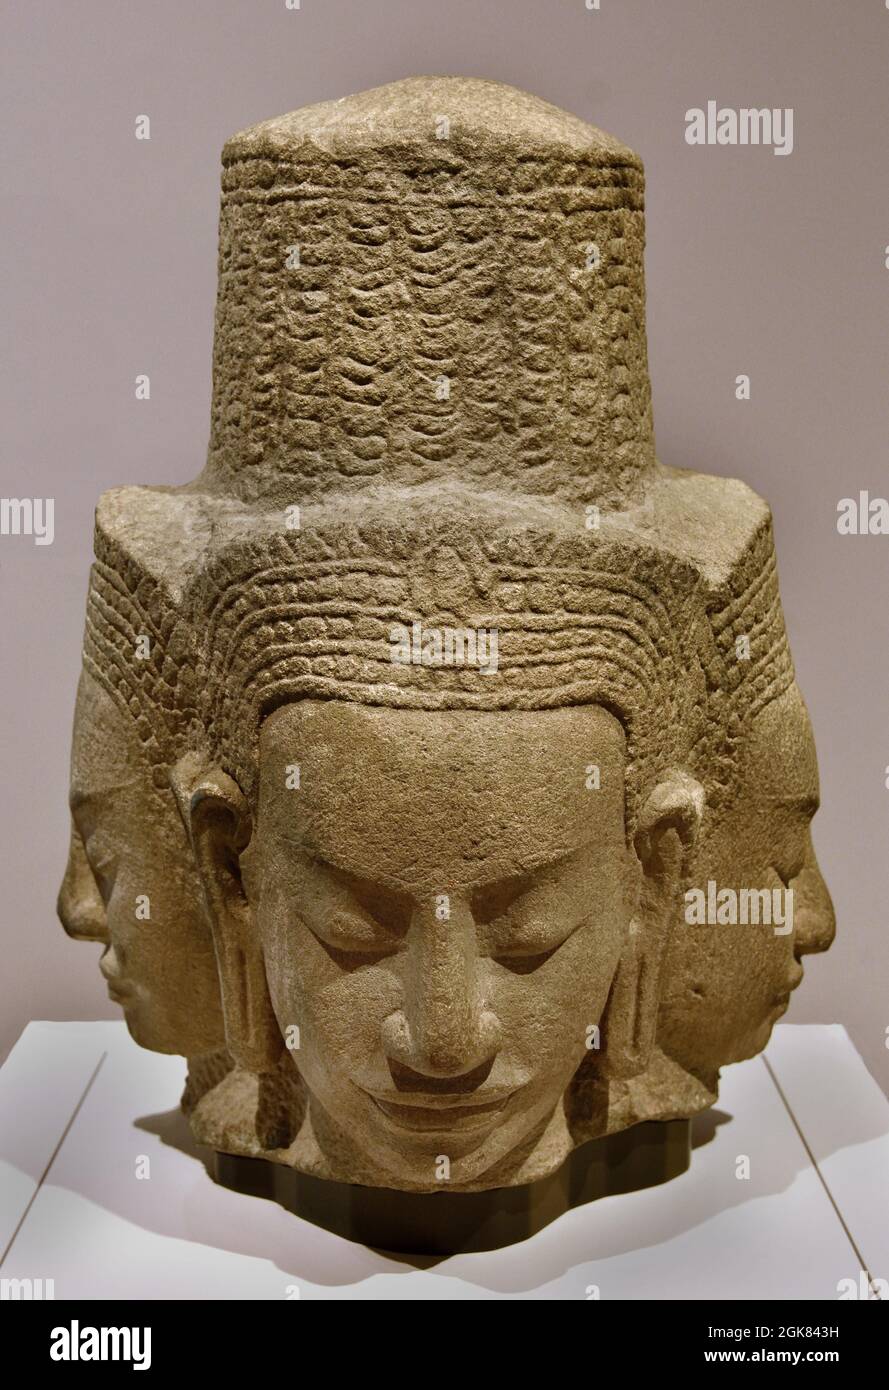 Head of a deity with four faces Cambodia, Angkor 1175-1250 Sandstone,  35.0cm  Cambodian . ( Head, four faces, Buddhist temple of Ta Prohm at Angkor. Perhaps represents Prajnaparamita, the Buddhist goddess of wisdom, rather than a male deity or bodhisattva. ) Stock Photo